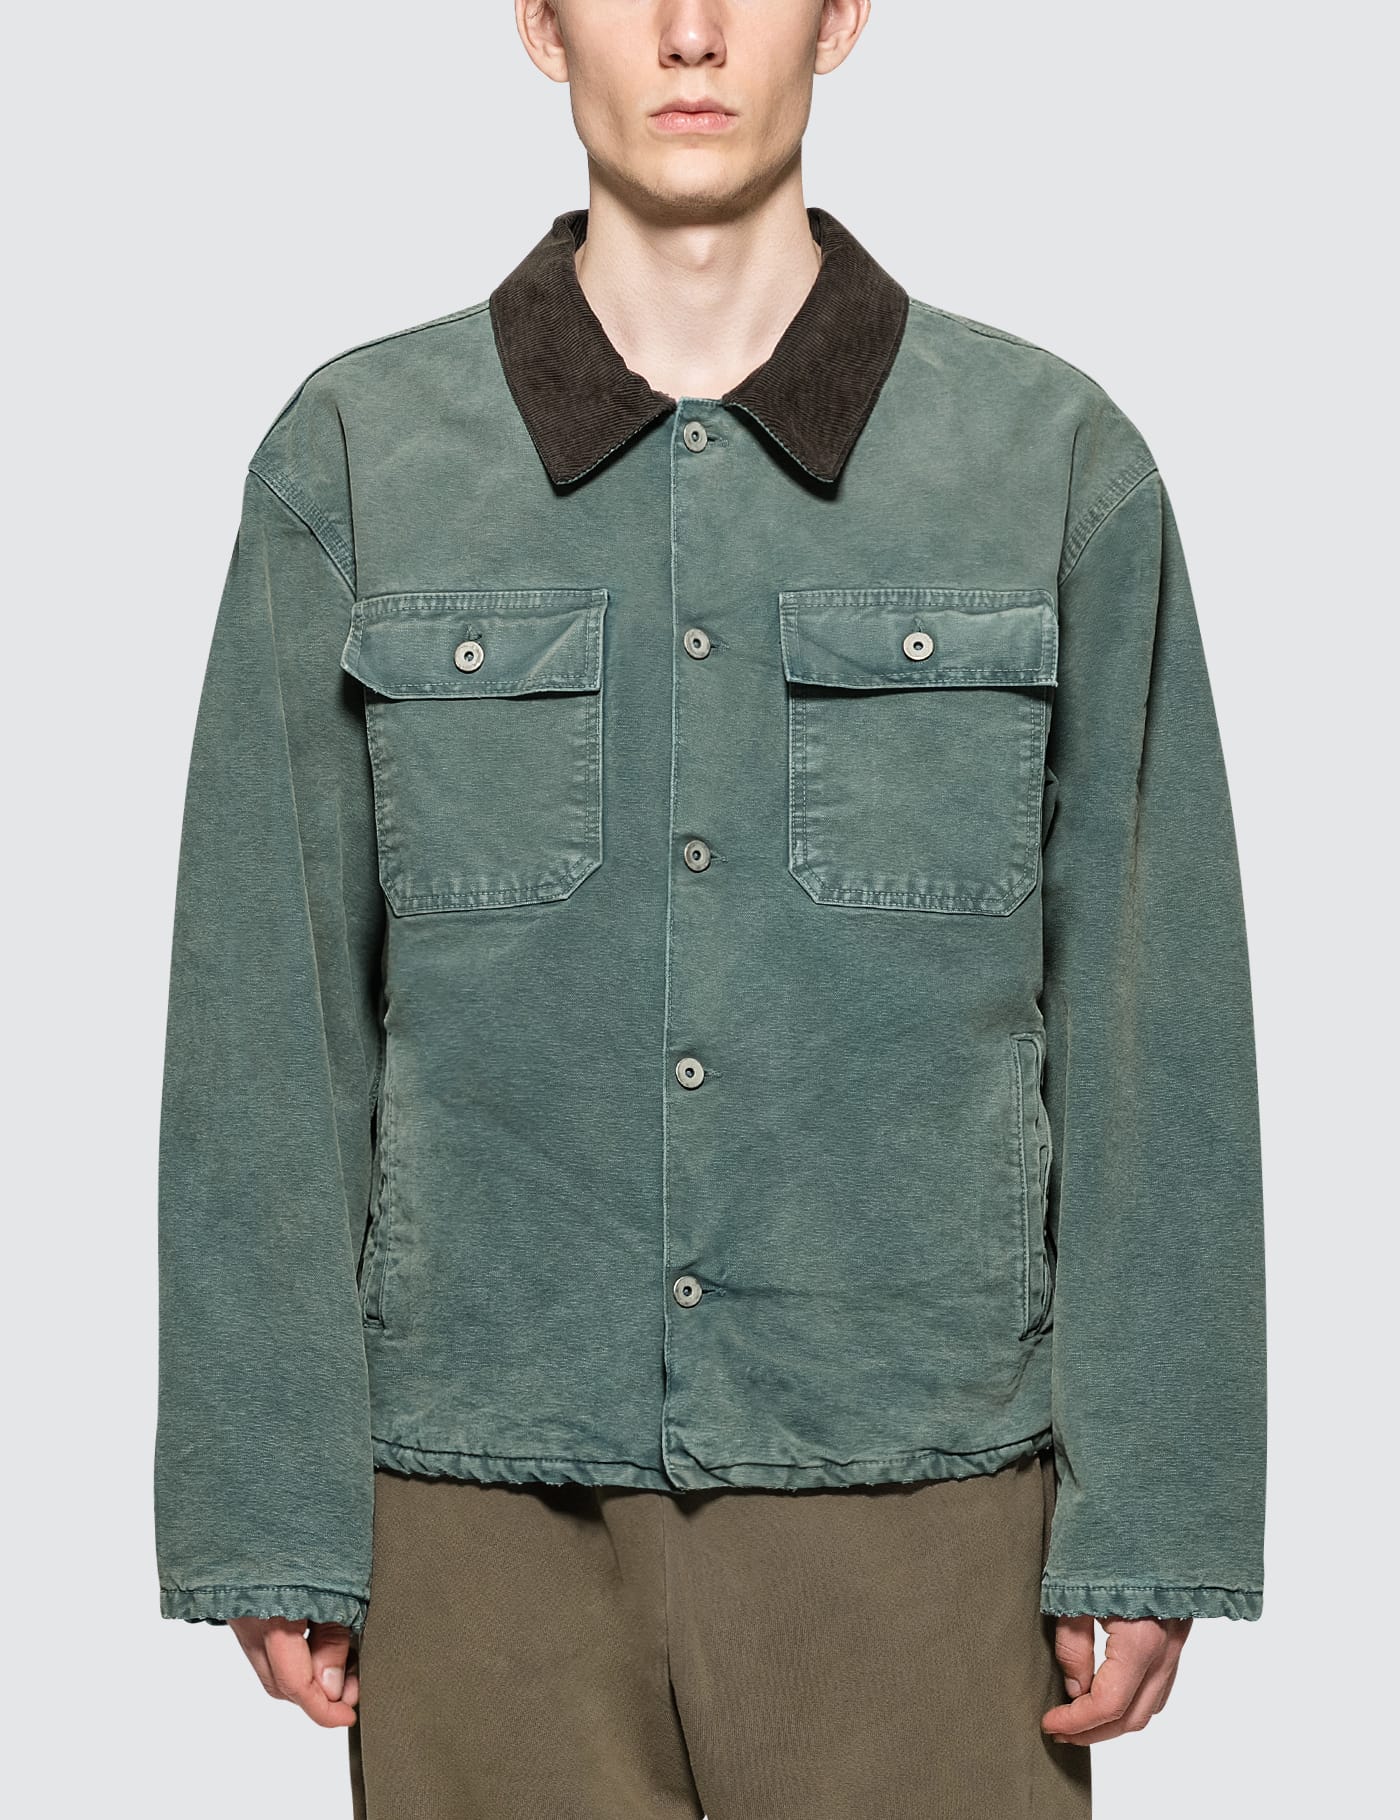 Yeezy - Flannel Lined Canvas Jacket | HBX